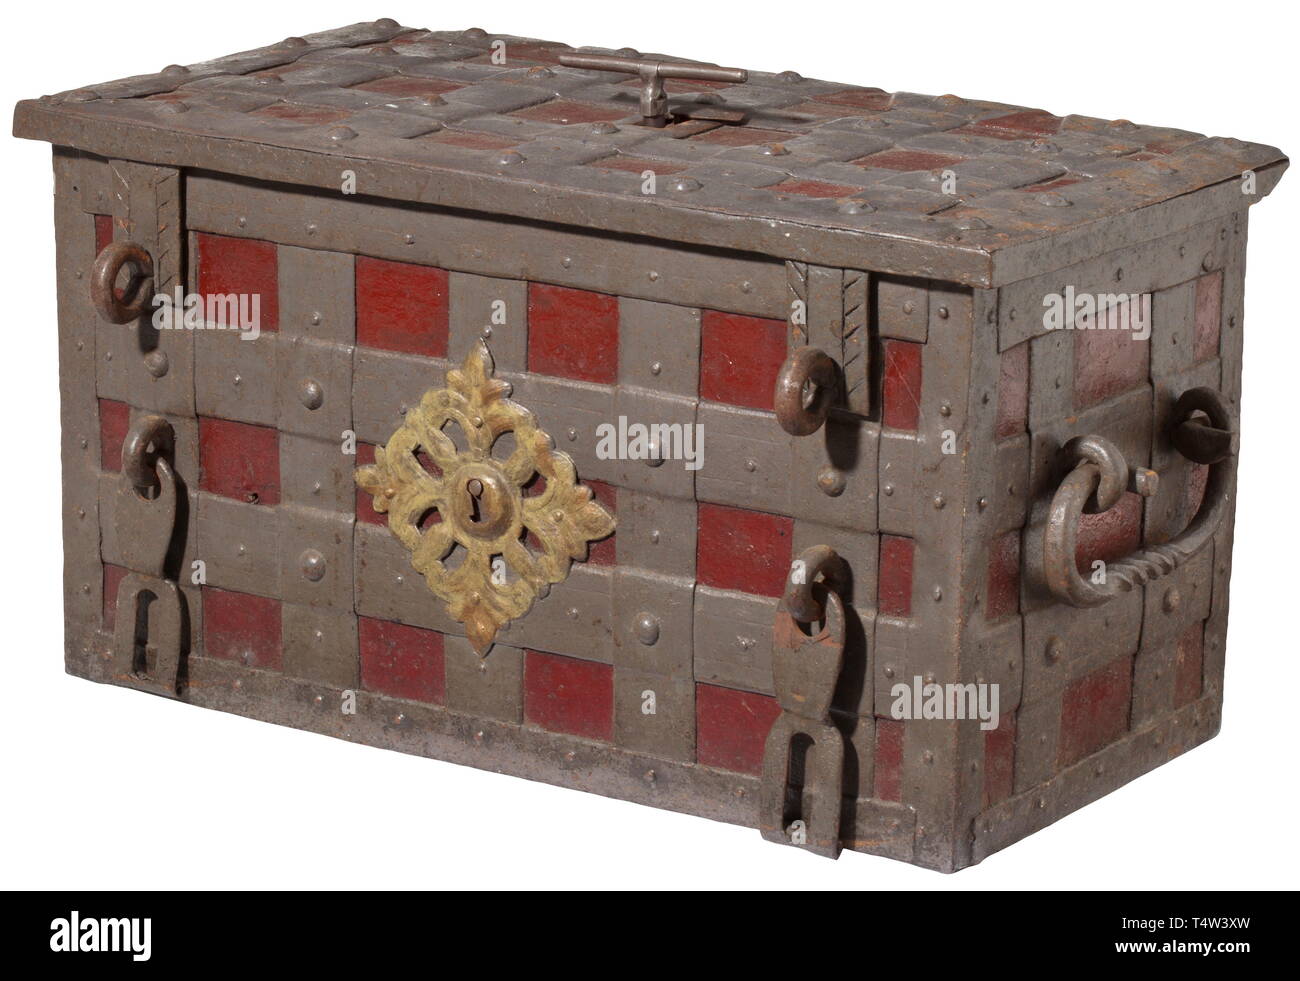 A heavy German war chest, circa 1700 Rectangular body made of sheet iron with broad, riveted reinforcement straps. The lid with a central keyhole, one false keyhole on the front side with openwork frame. Mechanism with ten latches on the inside. Richly pierced and engraved tin-plated cover. Two movable carrying handles on the sides. The key a replacement, the mechanism fully functional. Dimensions 47 x 85 x 47 cm. historic, historical, 18th century, Additional-Rights-Clearance-Info-Not-Available Stock Photo